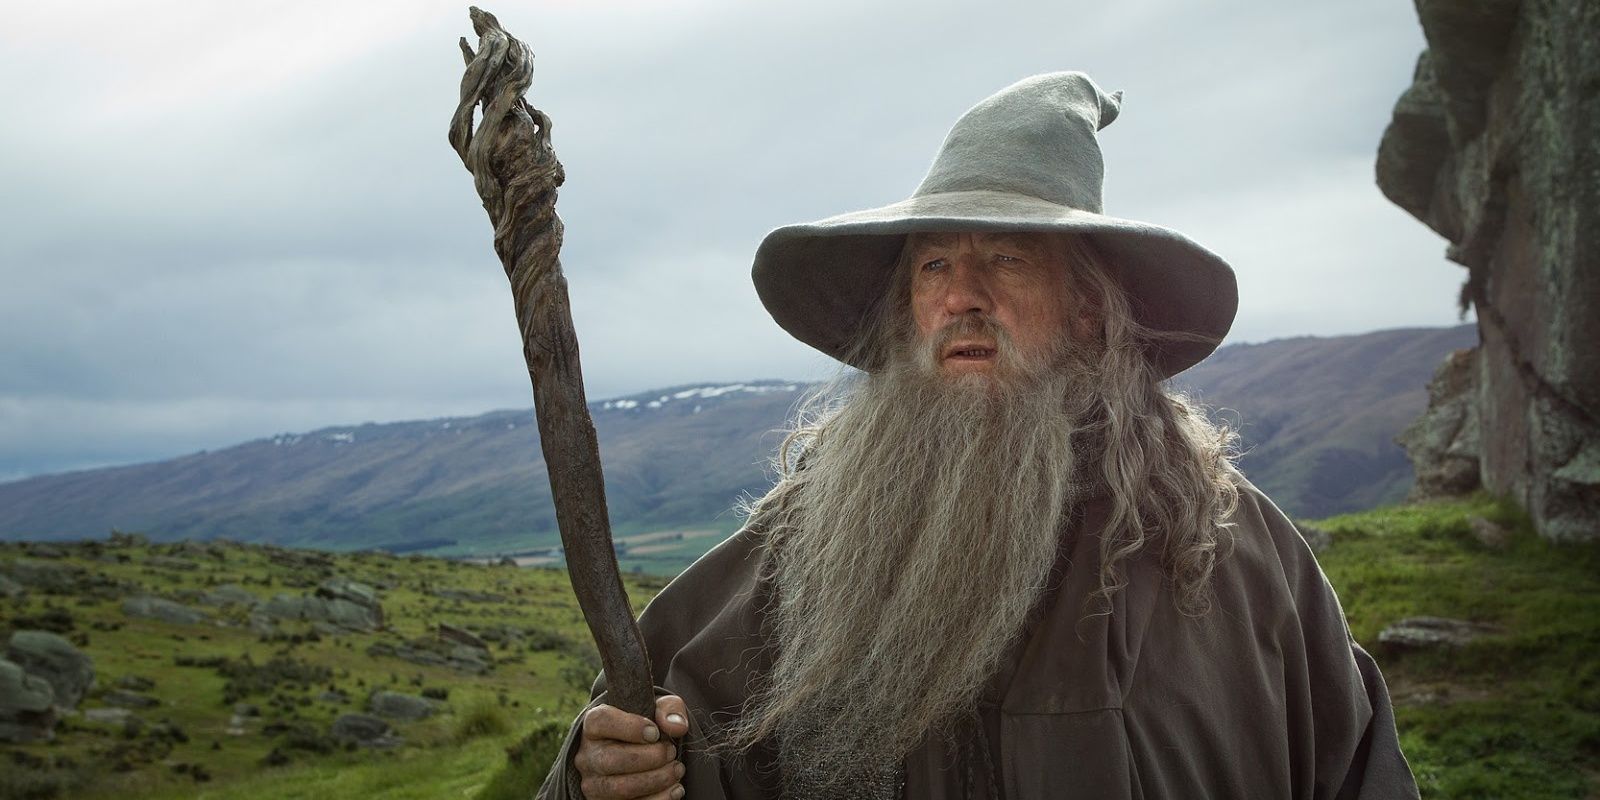 gandalf the grey standing in scenic hills with staff hat and robes